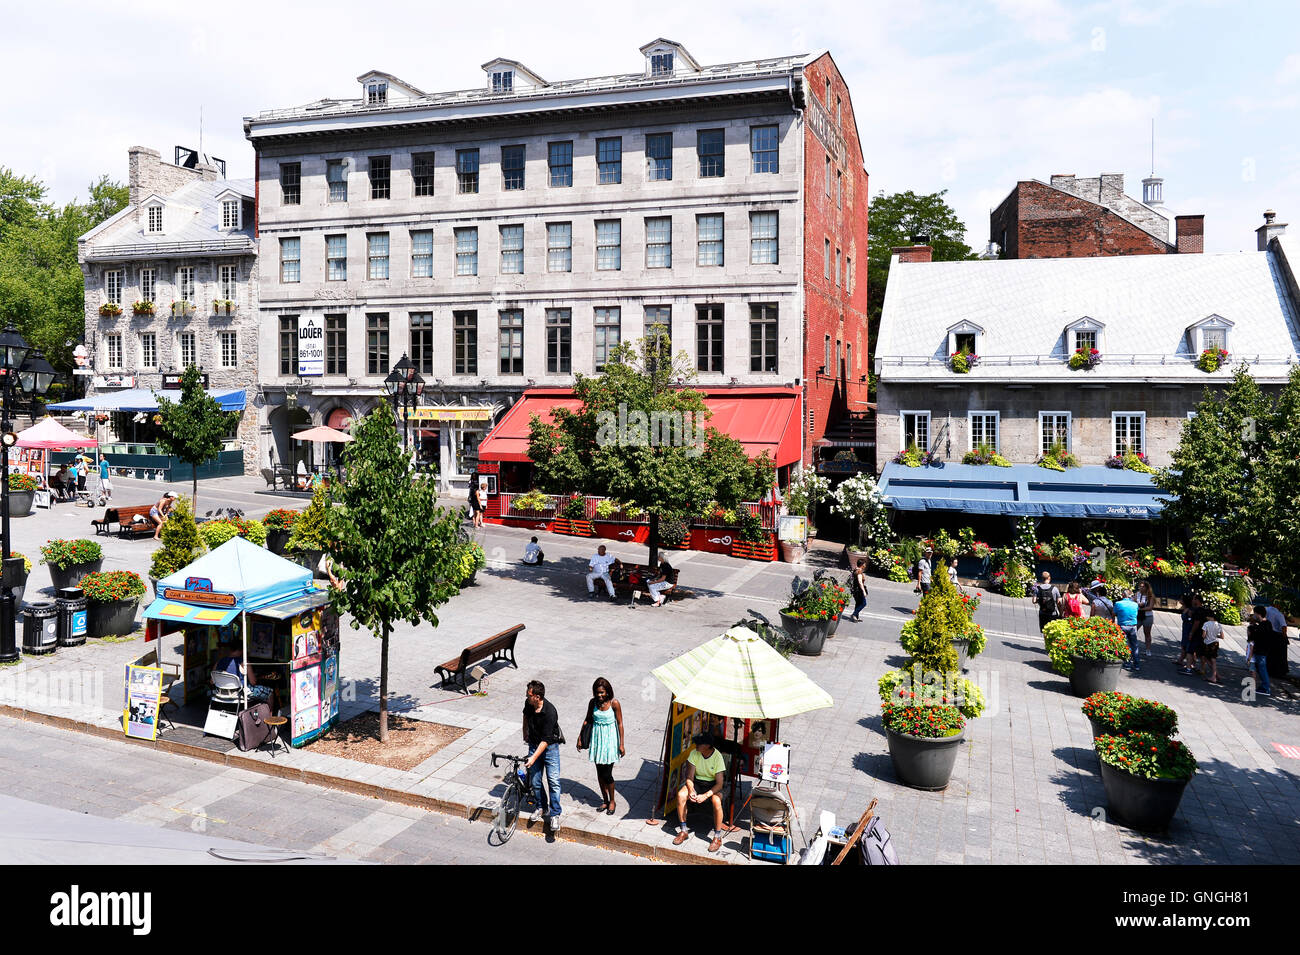 The Nelson hotel on Place Jacques Cartier in Old Montreal, Quebec, Canada Stock Photo